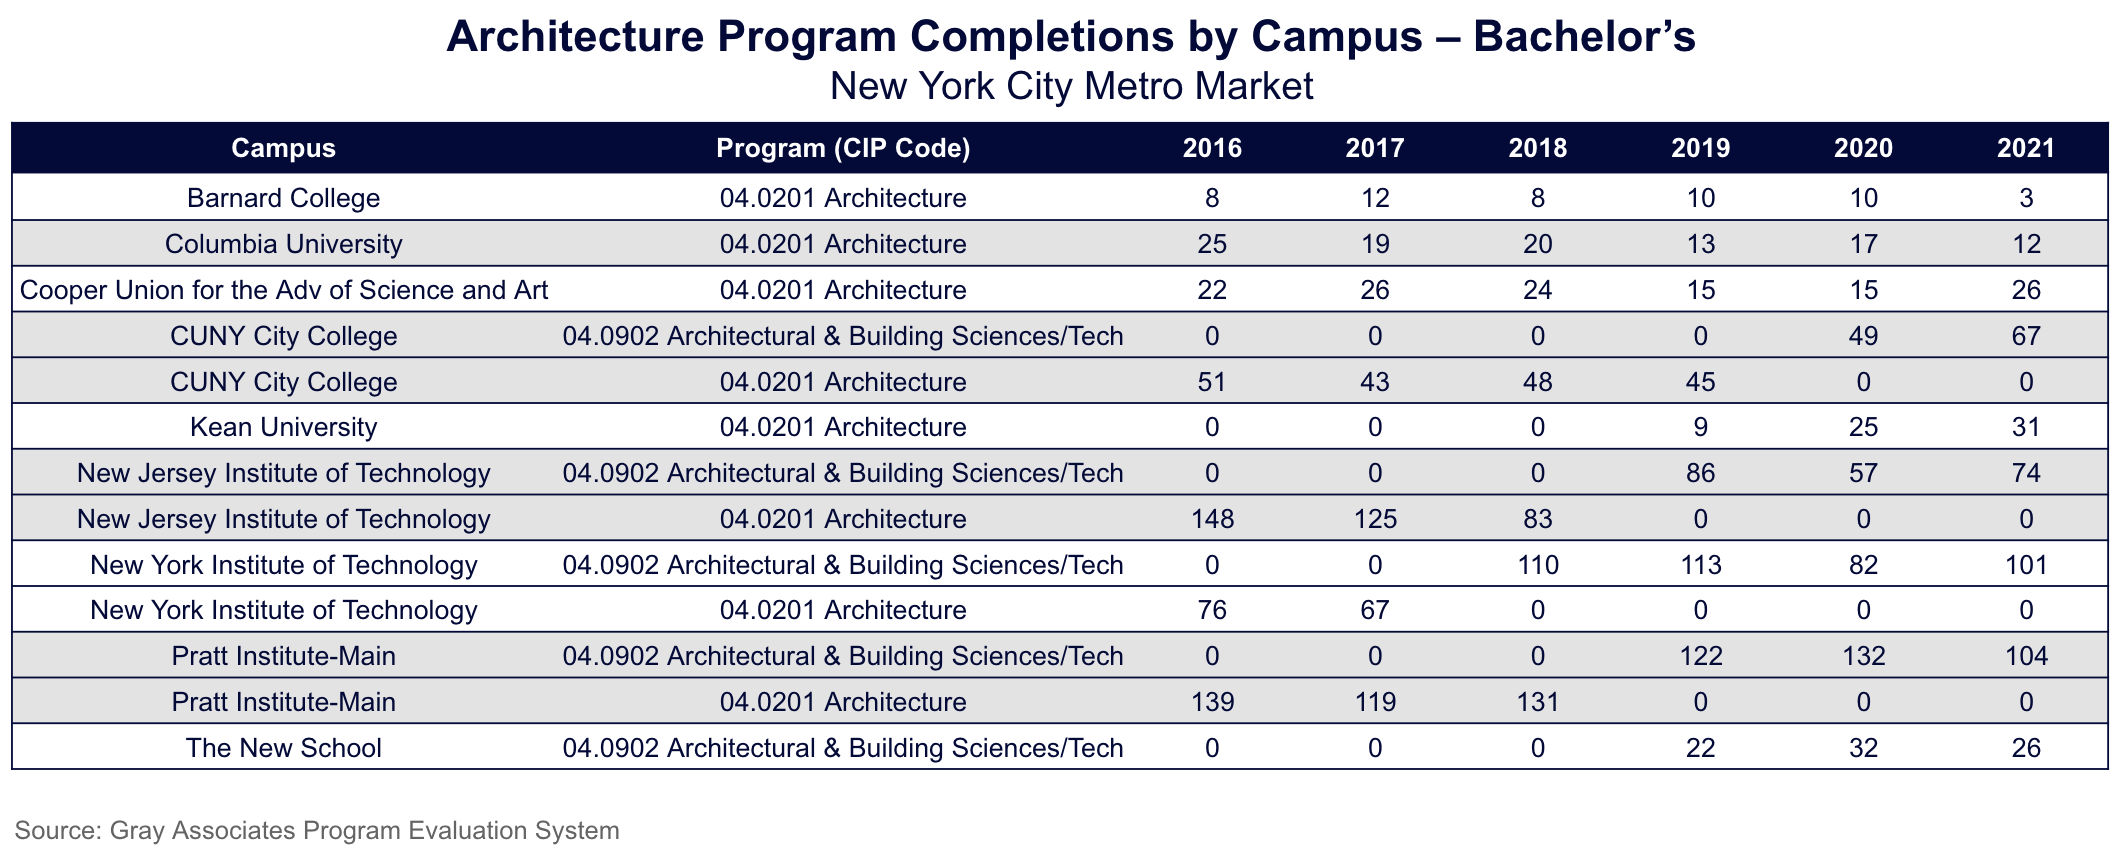 Architecture Program Completions by Campus - Bachelor's (New York City Metro Market)